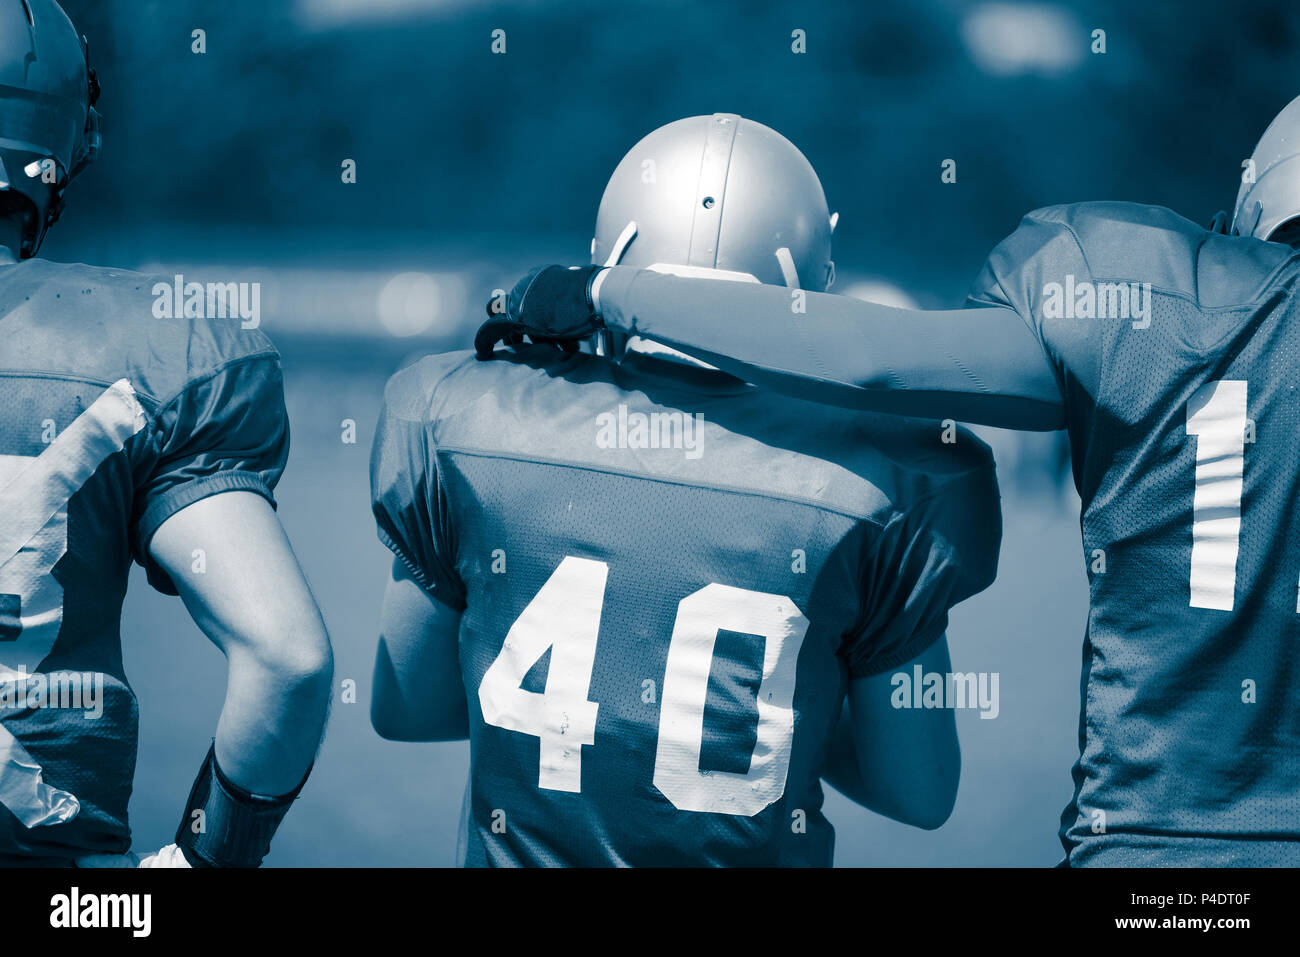 Cyanotype toned image of American Football players in action Stock Photo